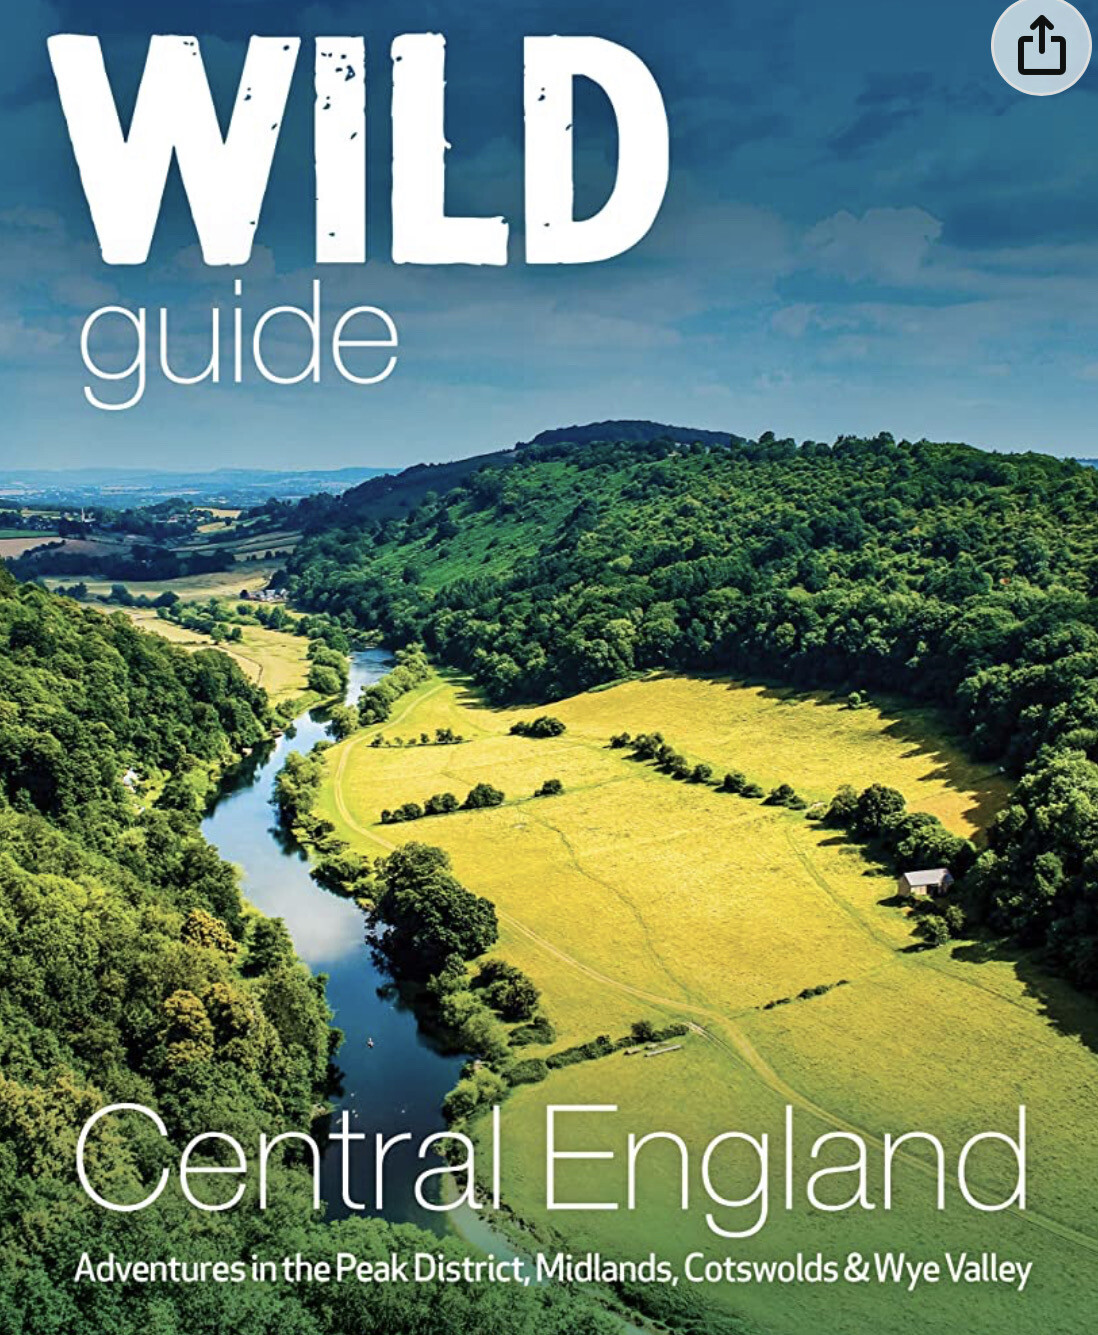 Wild Guide. Central England